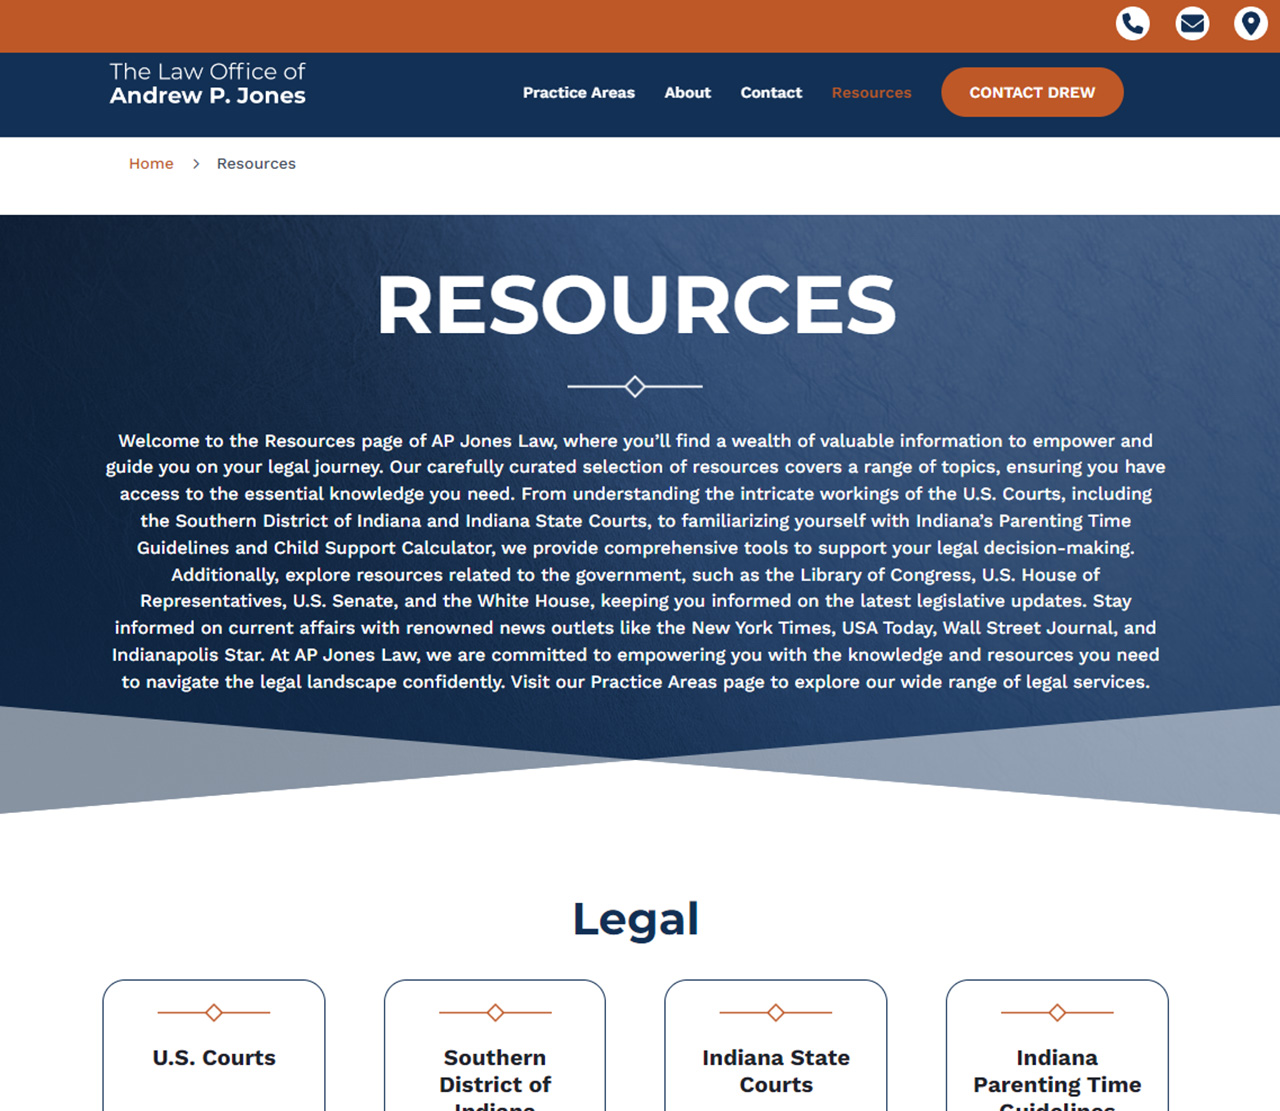 The Law Office of Andrew P. Jones Website Resources Page